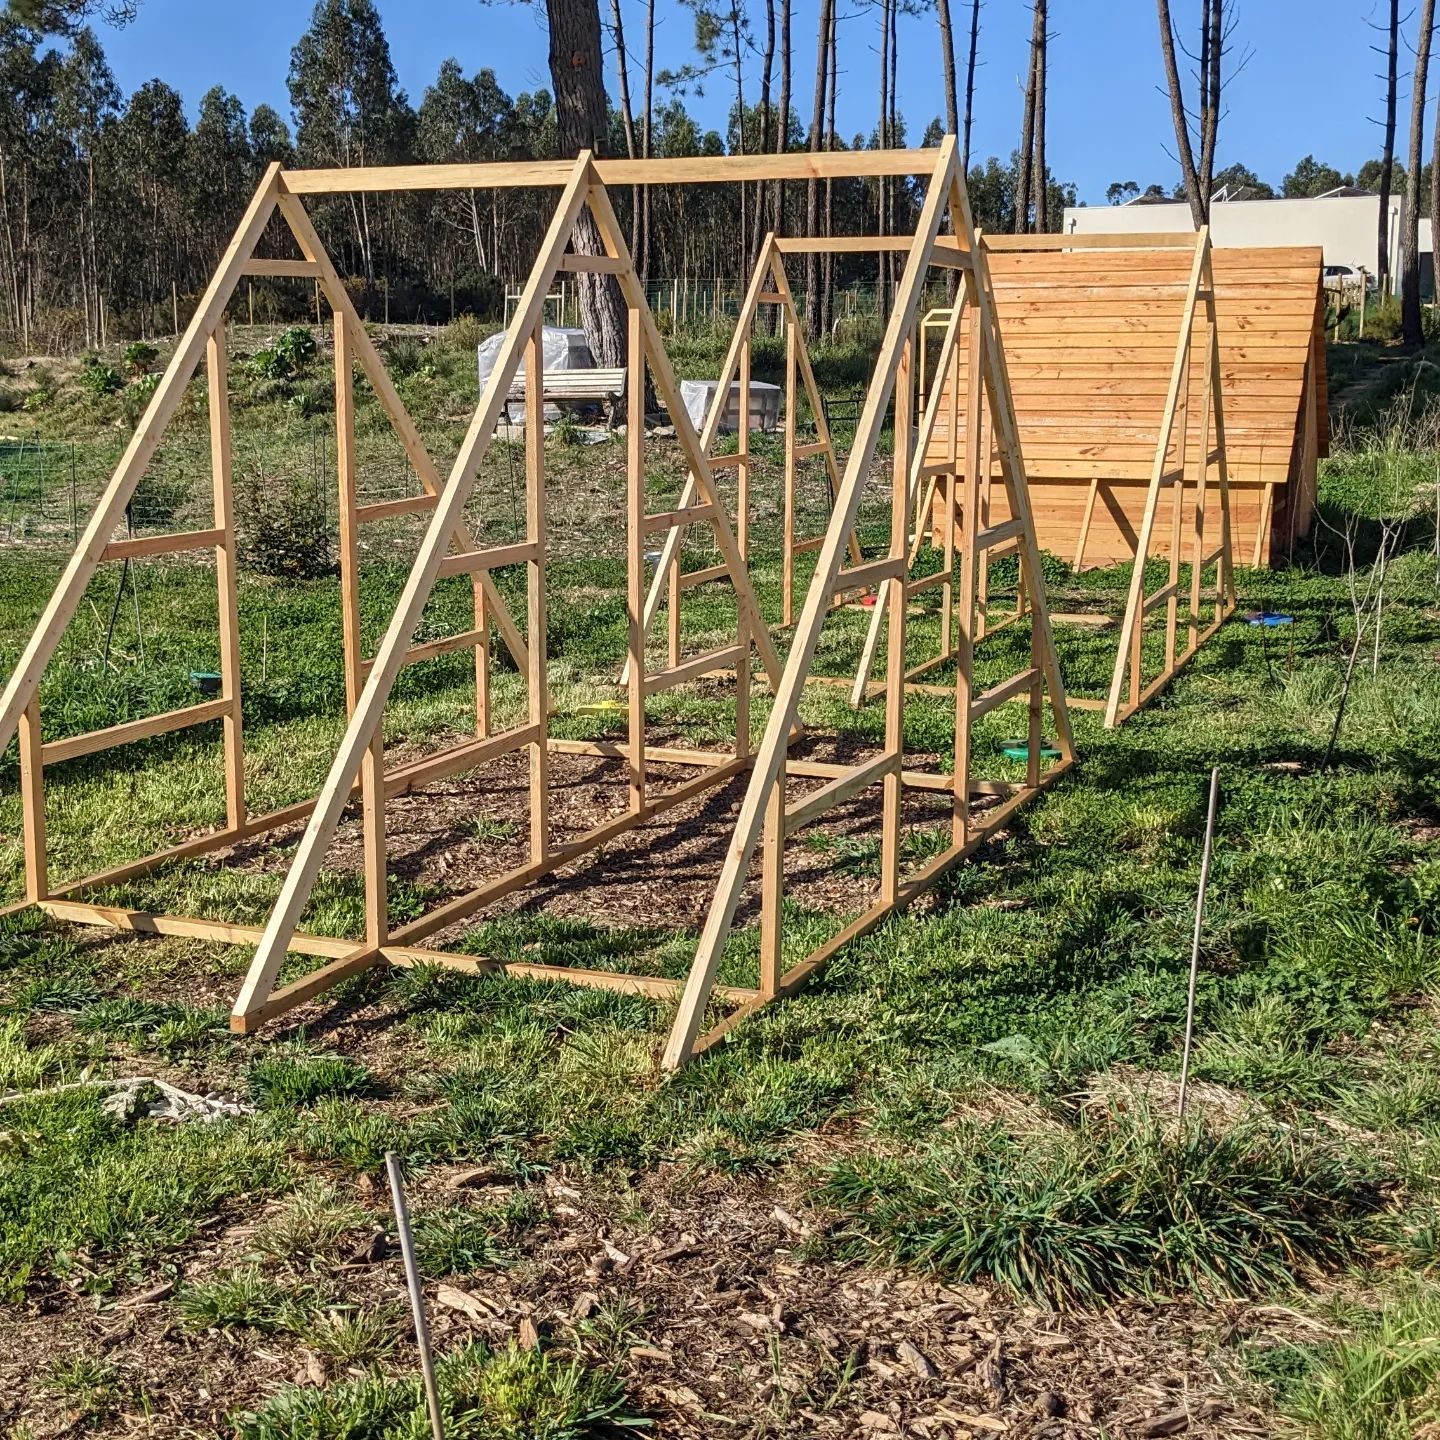 Second new coop frame in place